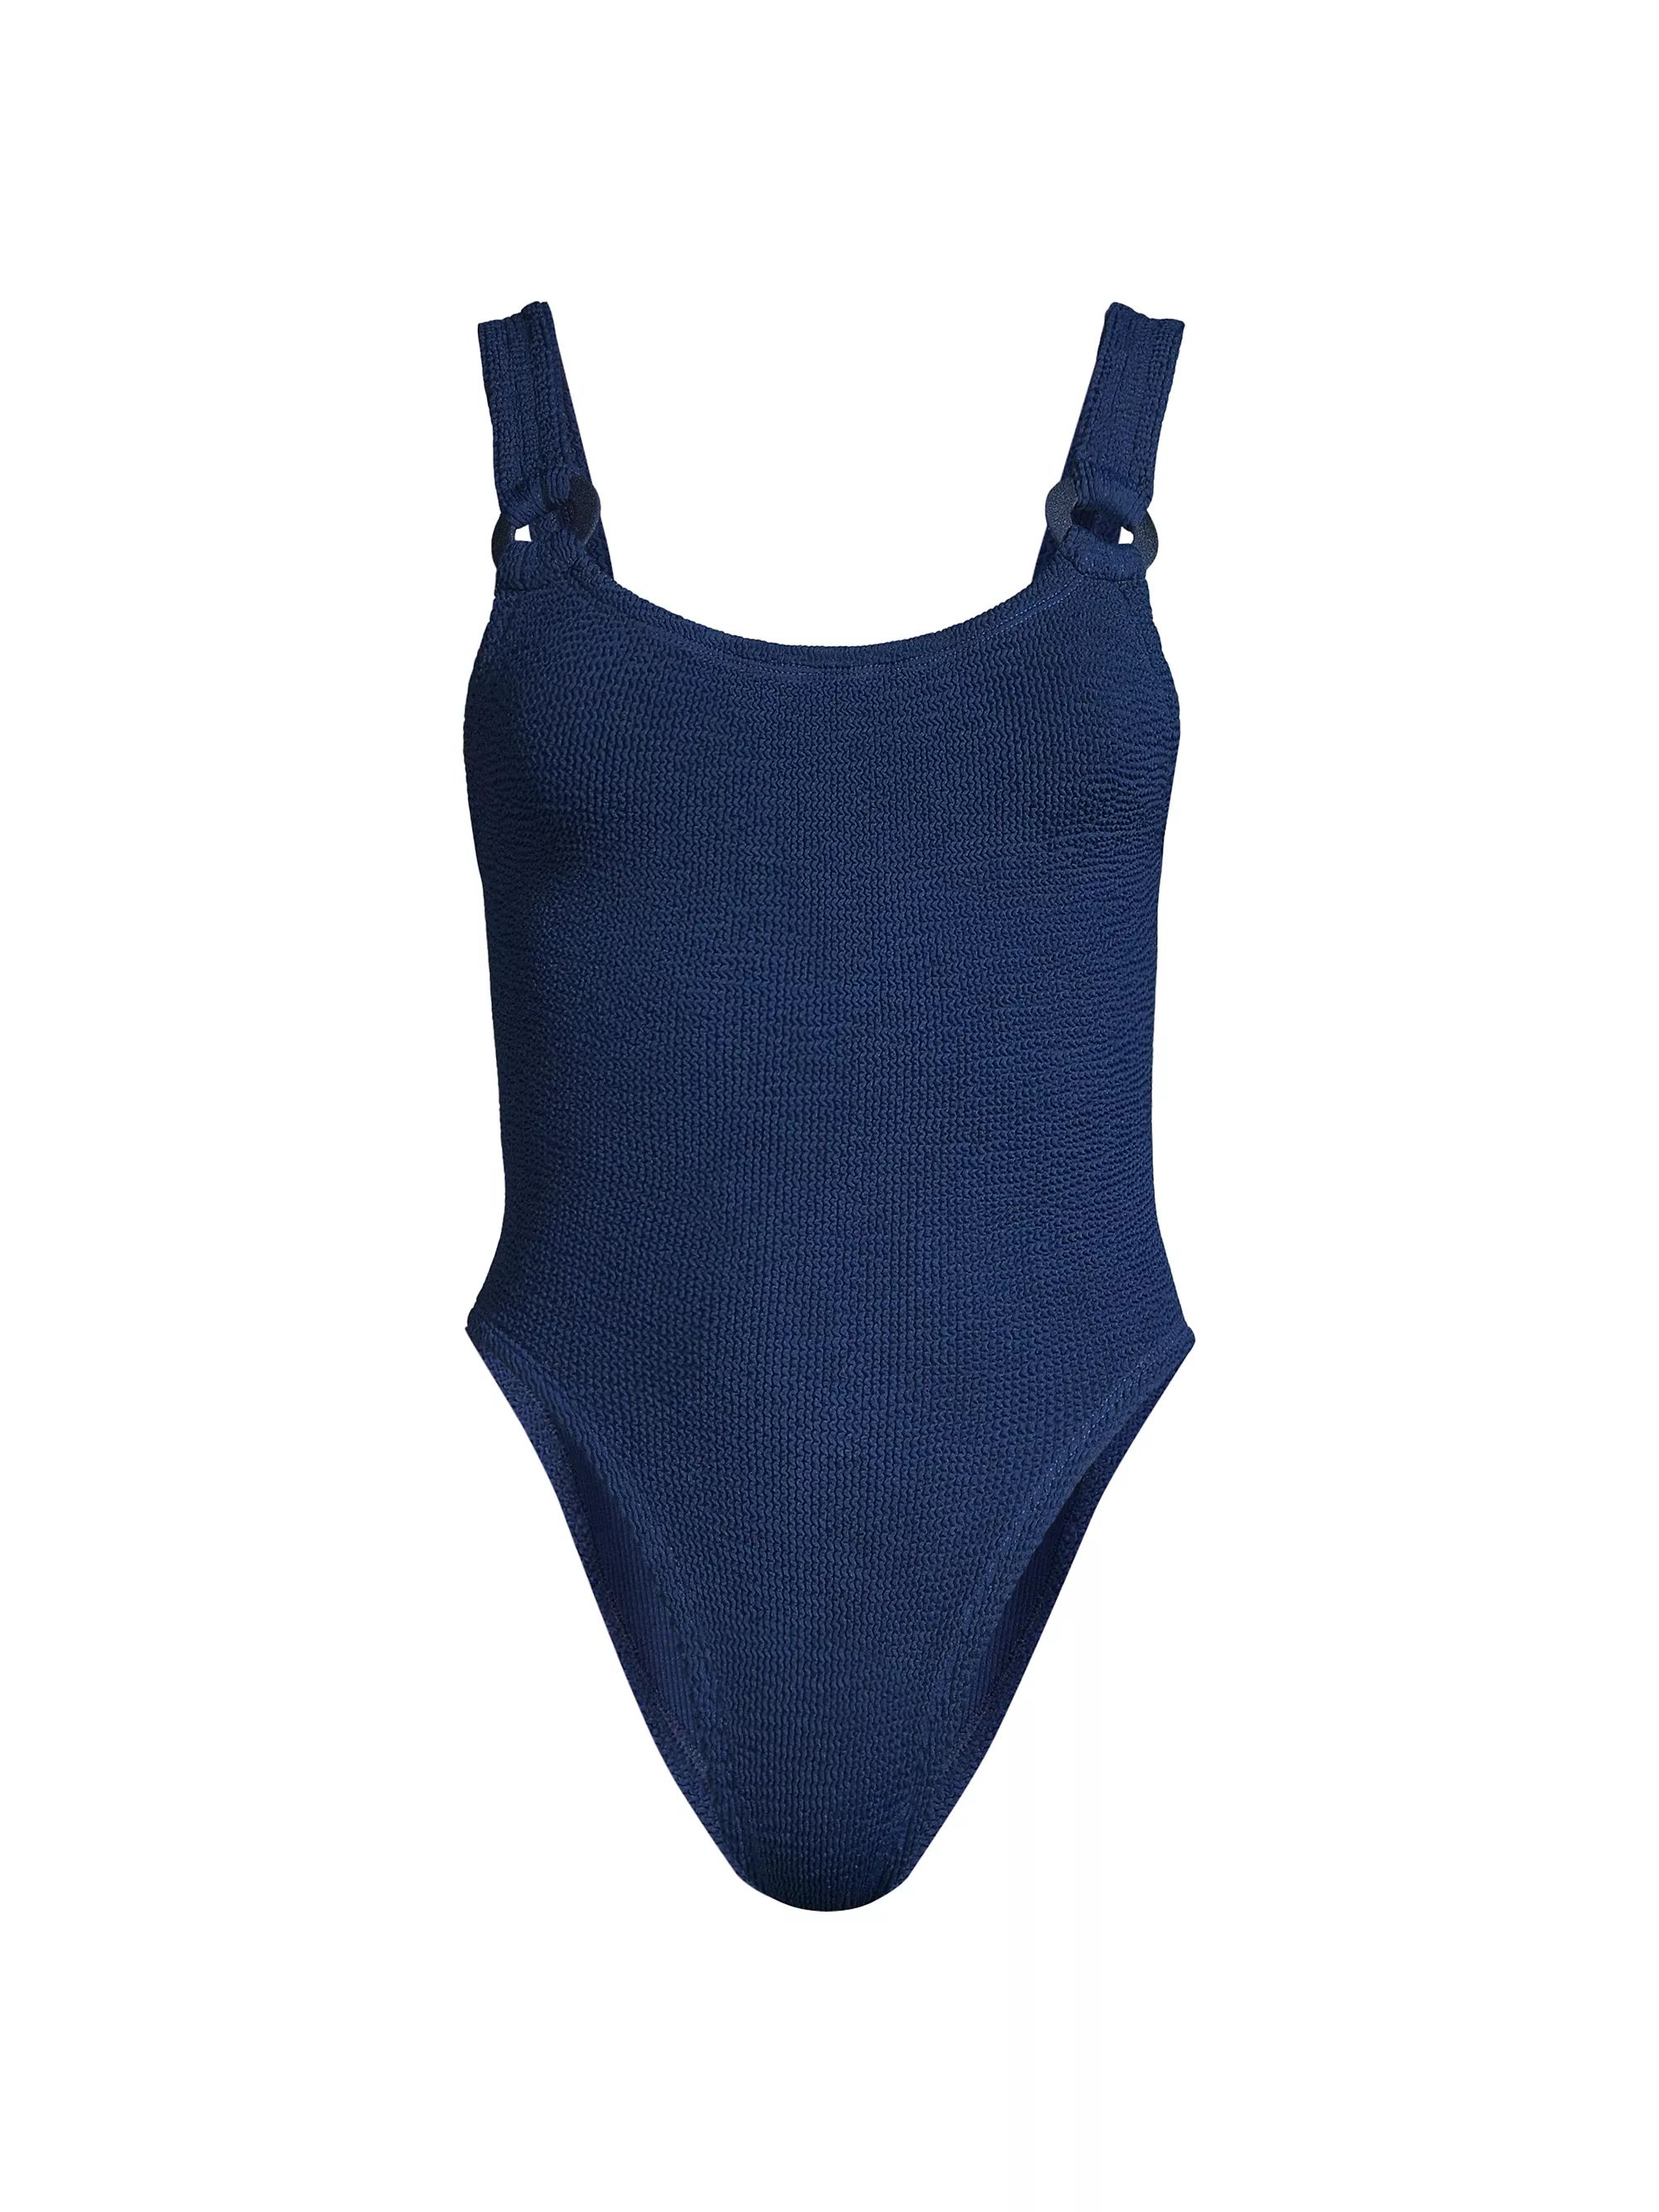 Domino Circle-Insert One-Piece Swimsuit | Saks Fifth Avenue